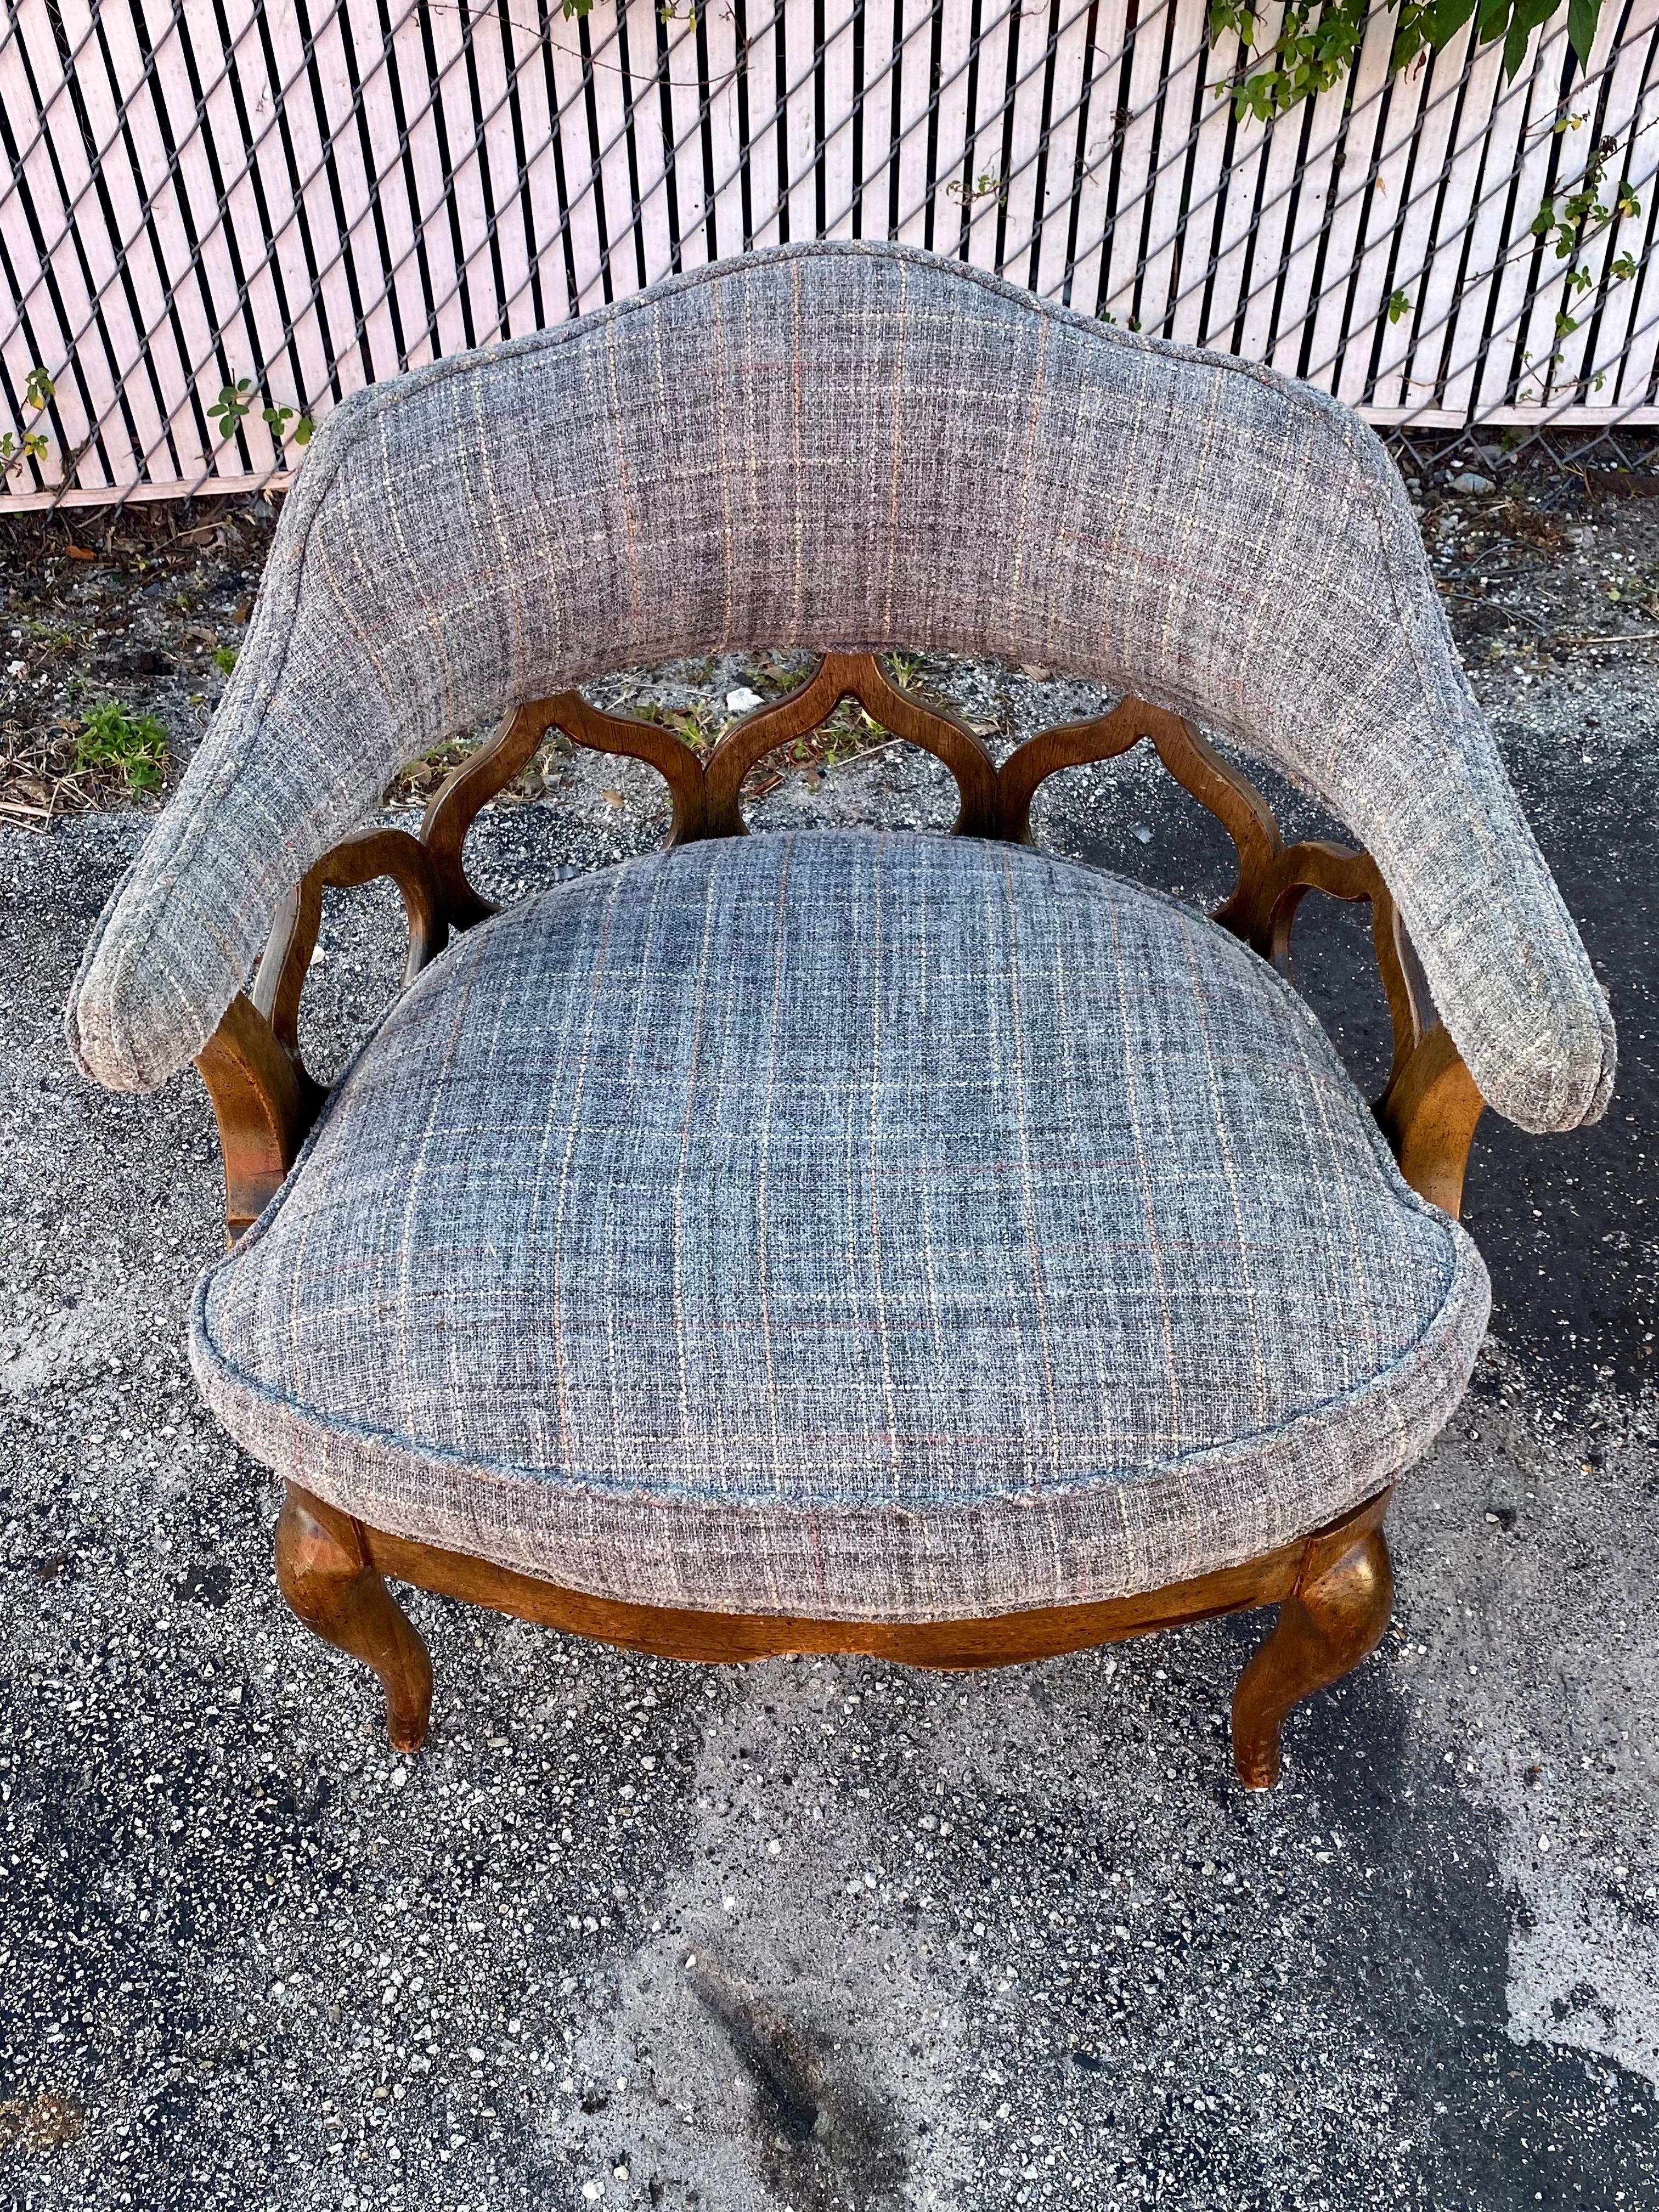 1970s  Mid Century Sculptural Curved Barrel Tweed Wood Chairs, Set of 2 For Sale 4